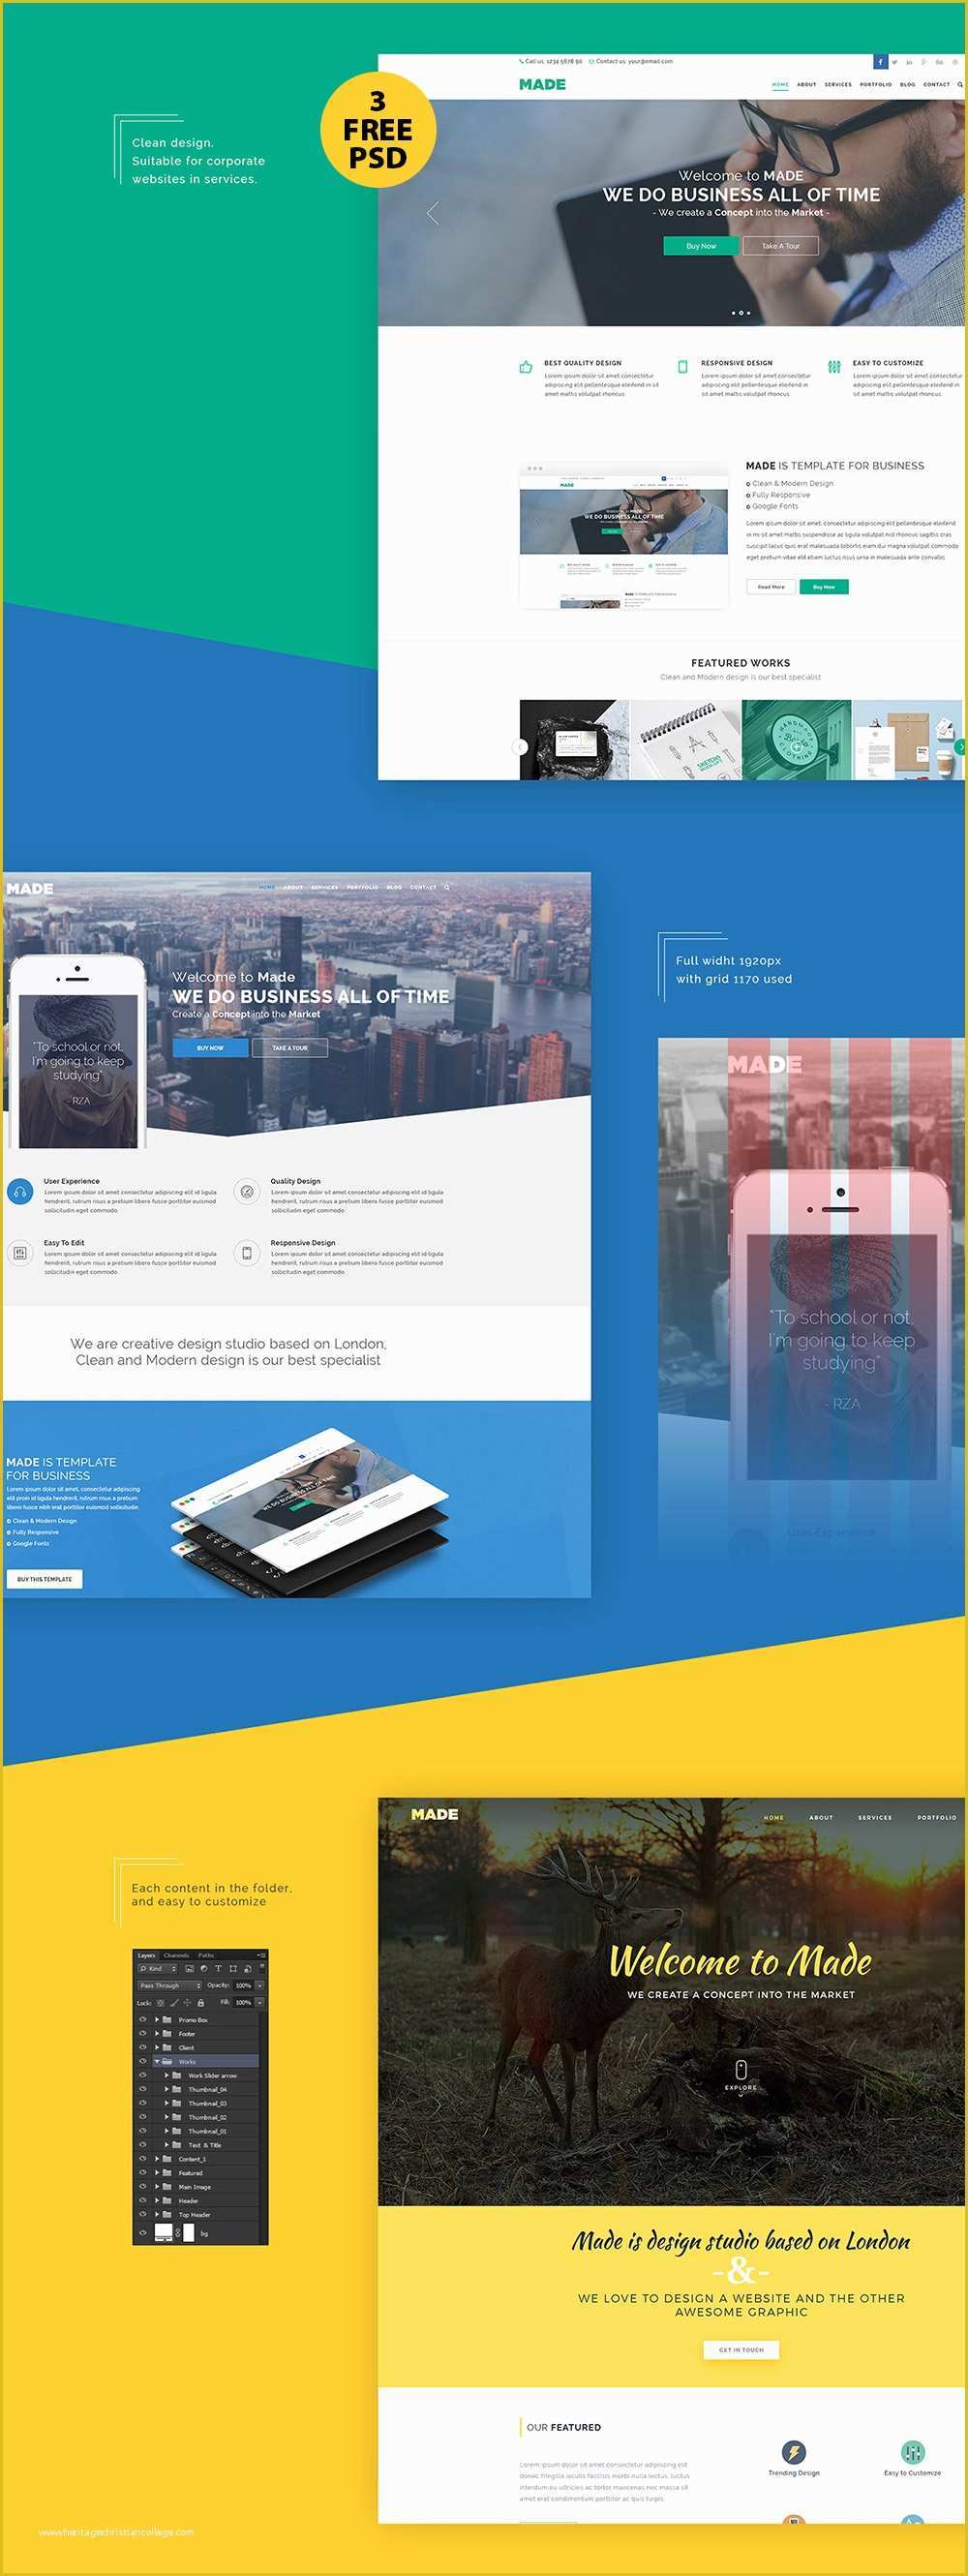 Business Website Templates Free Download Of High Quality 50 Free Corporate and Business Web Templates